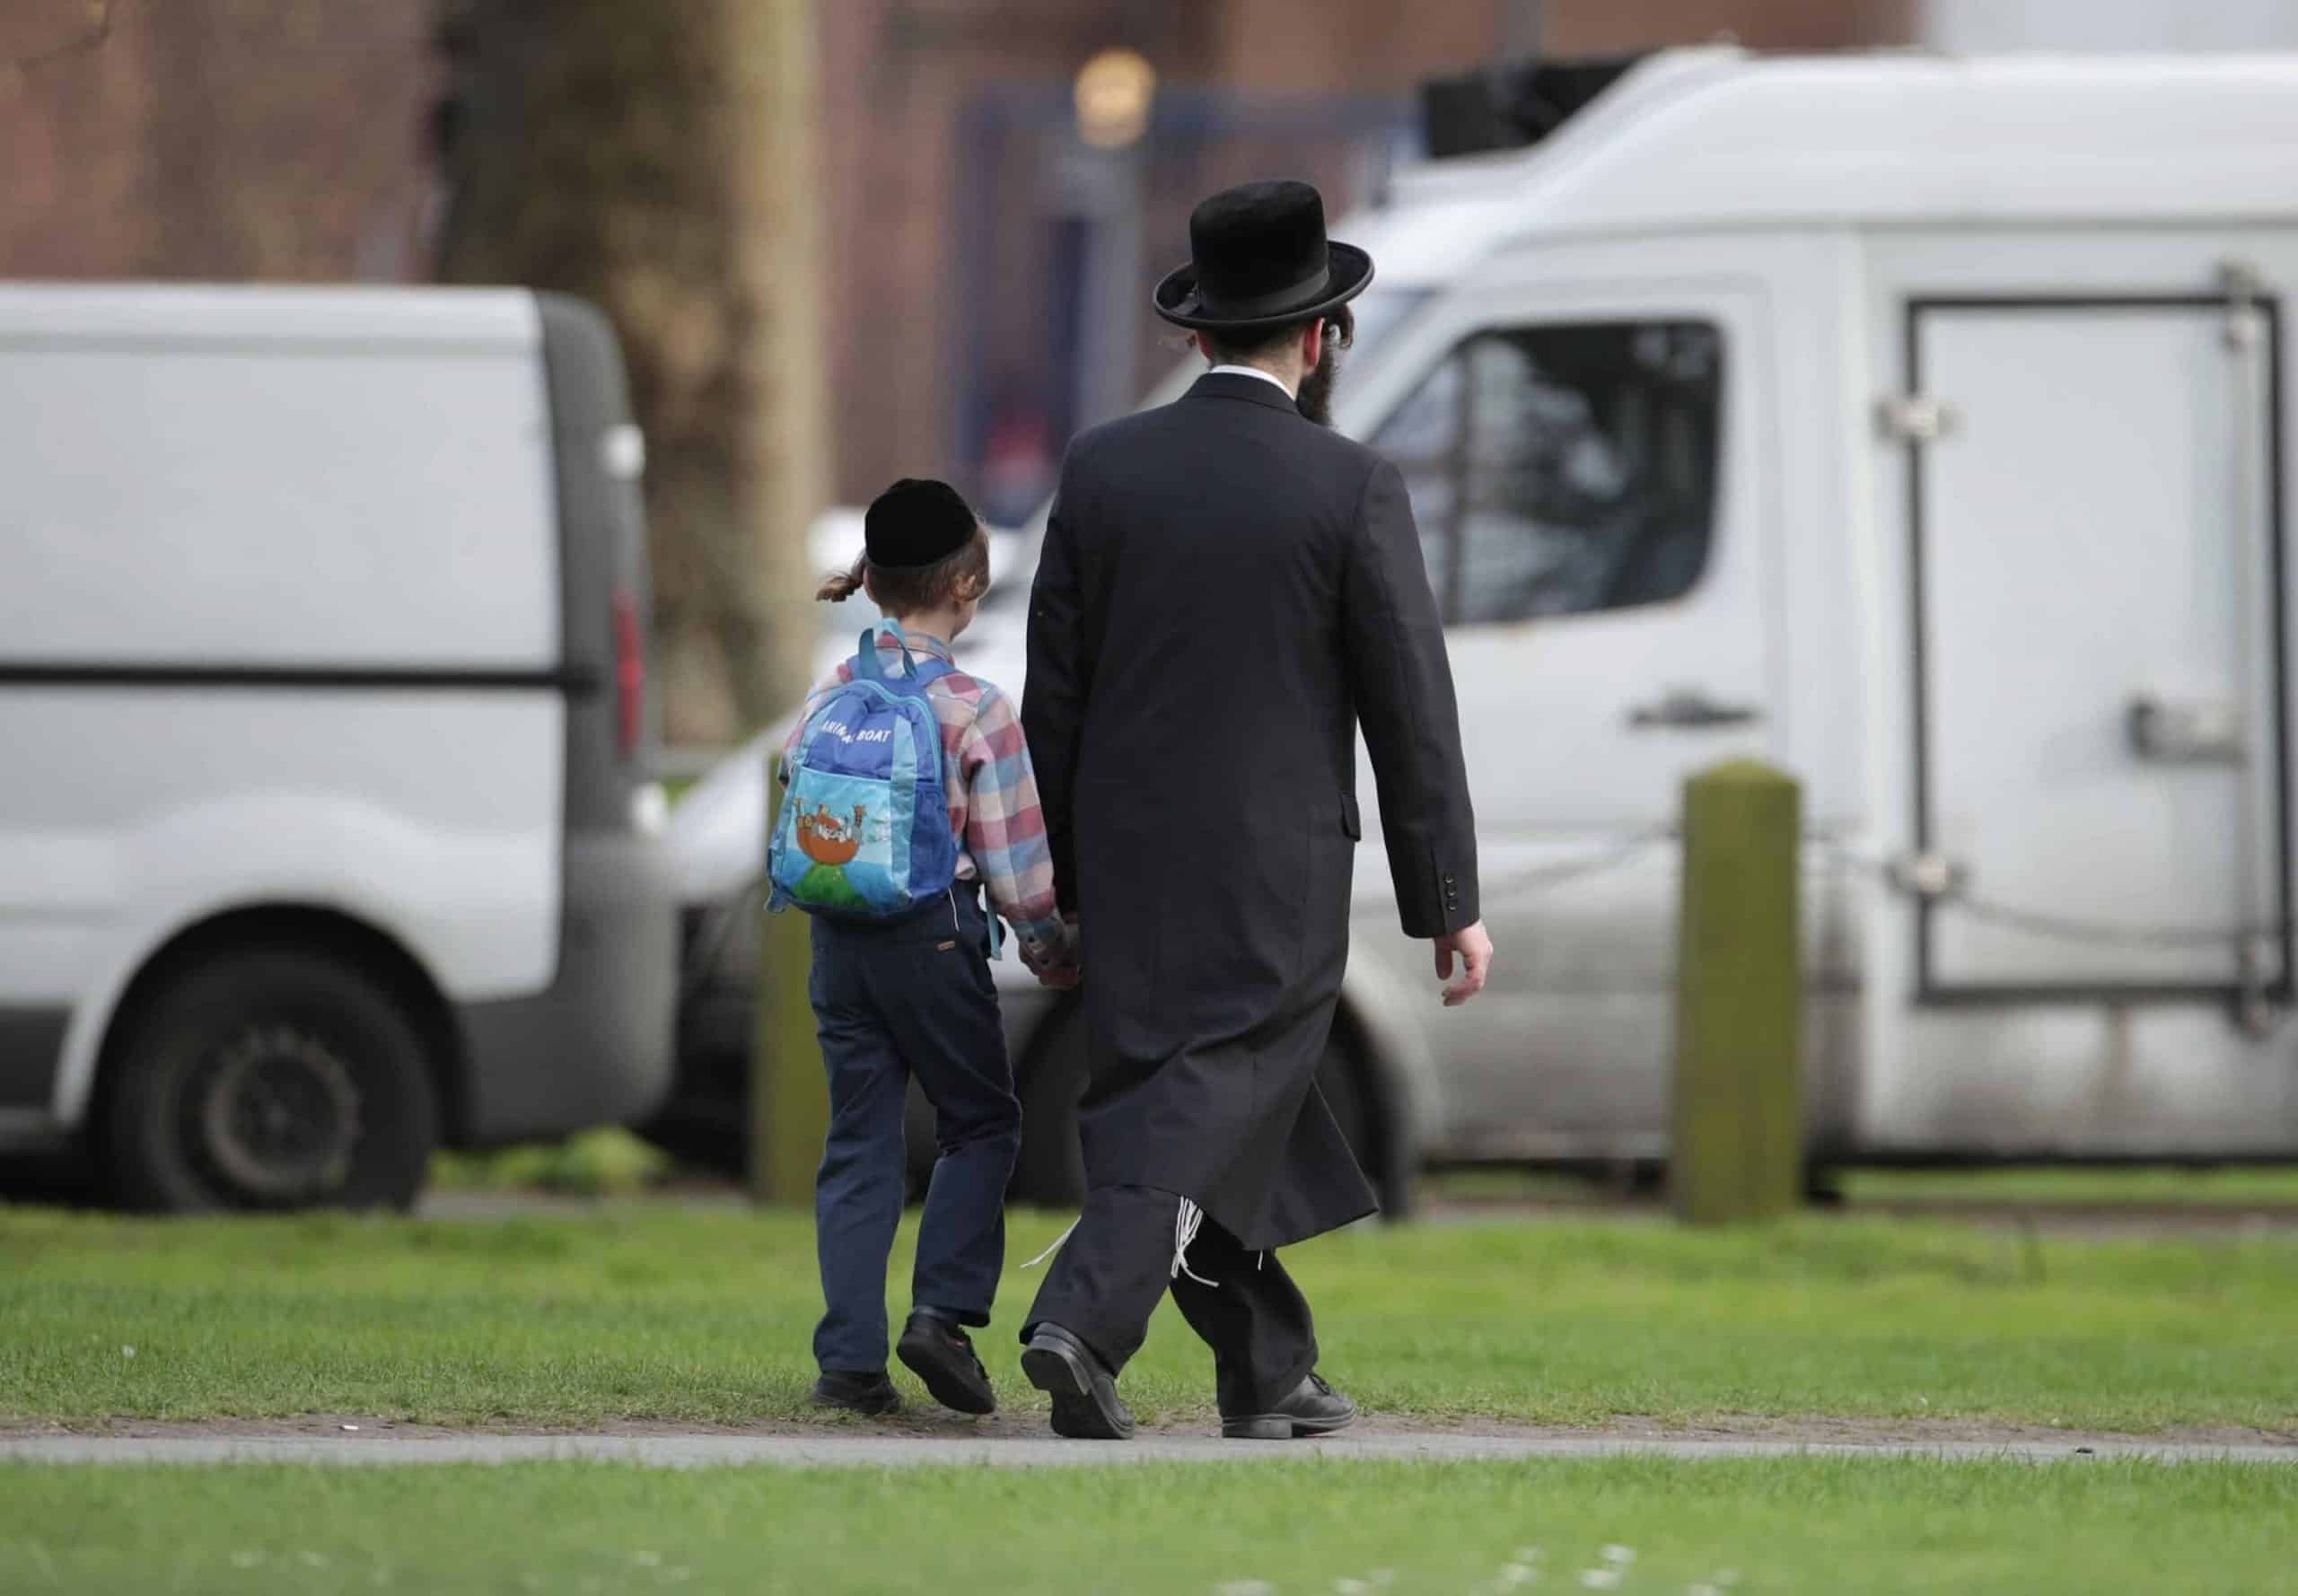 Record number of anti-Semitic hate incidents reported to charity